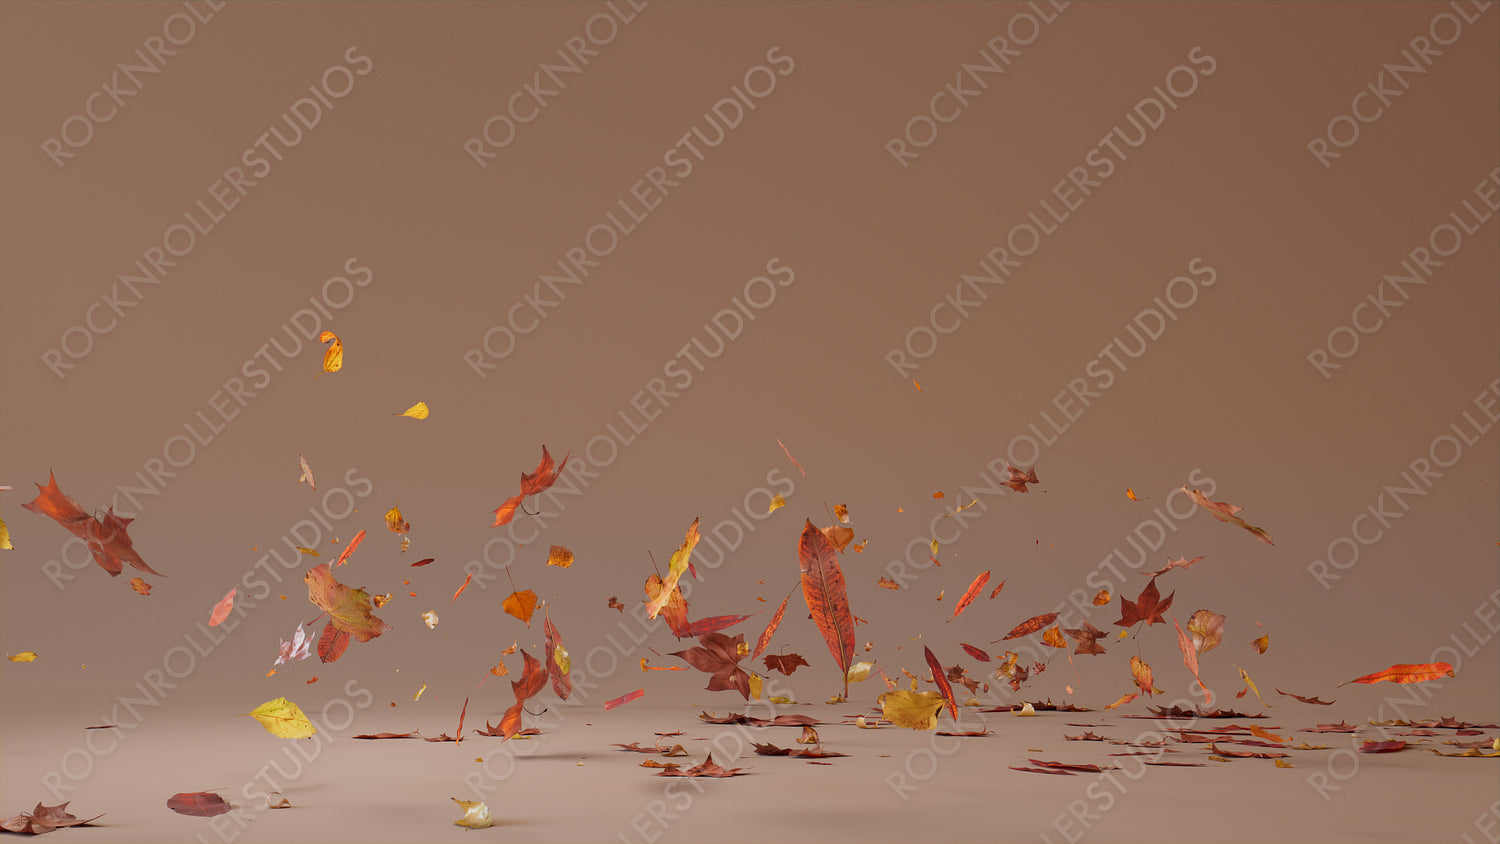 Dusty Pink Holiday Wallpaper with Falling Autumn Leaves. Natural Banner with copy-space.